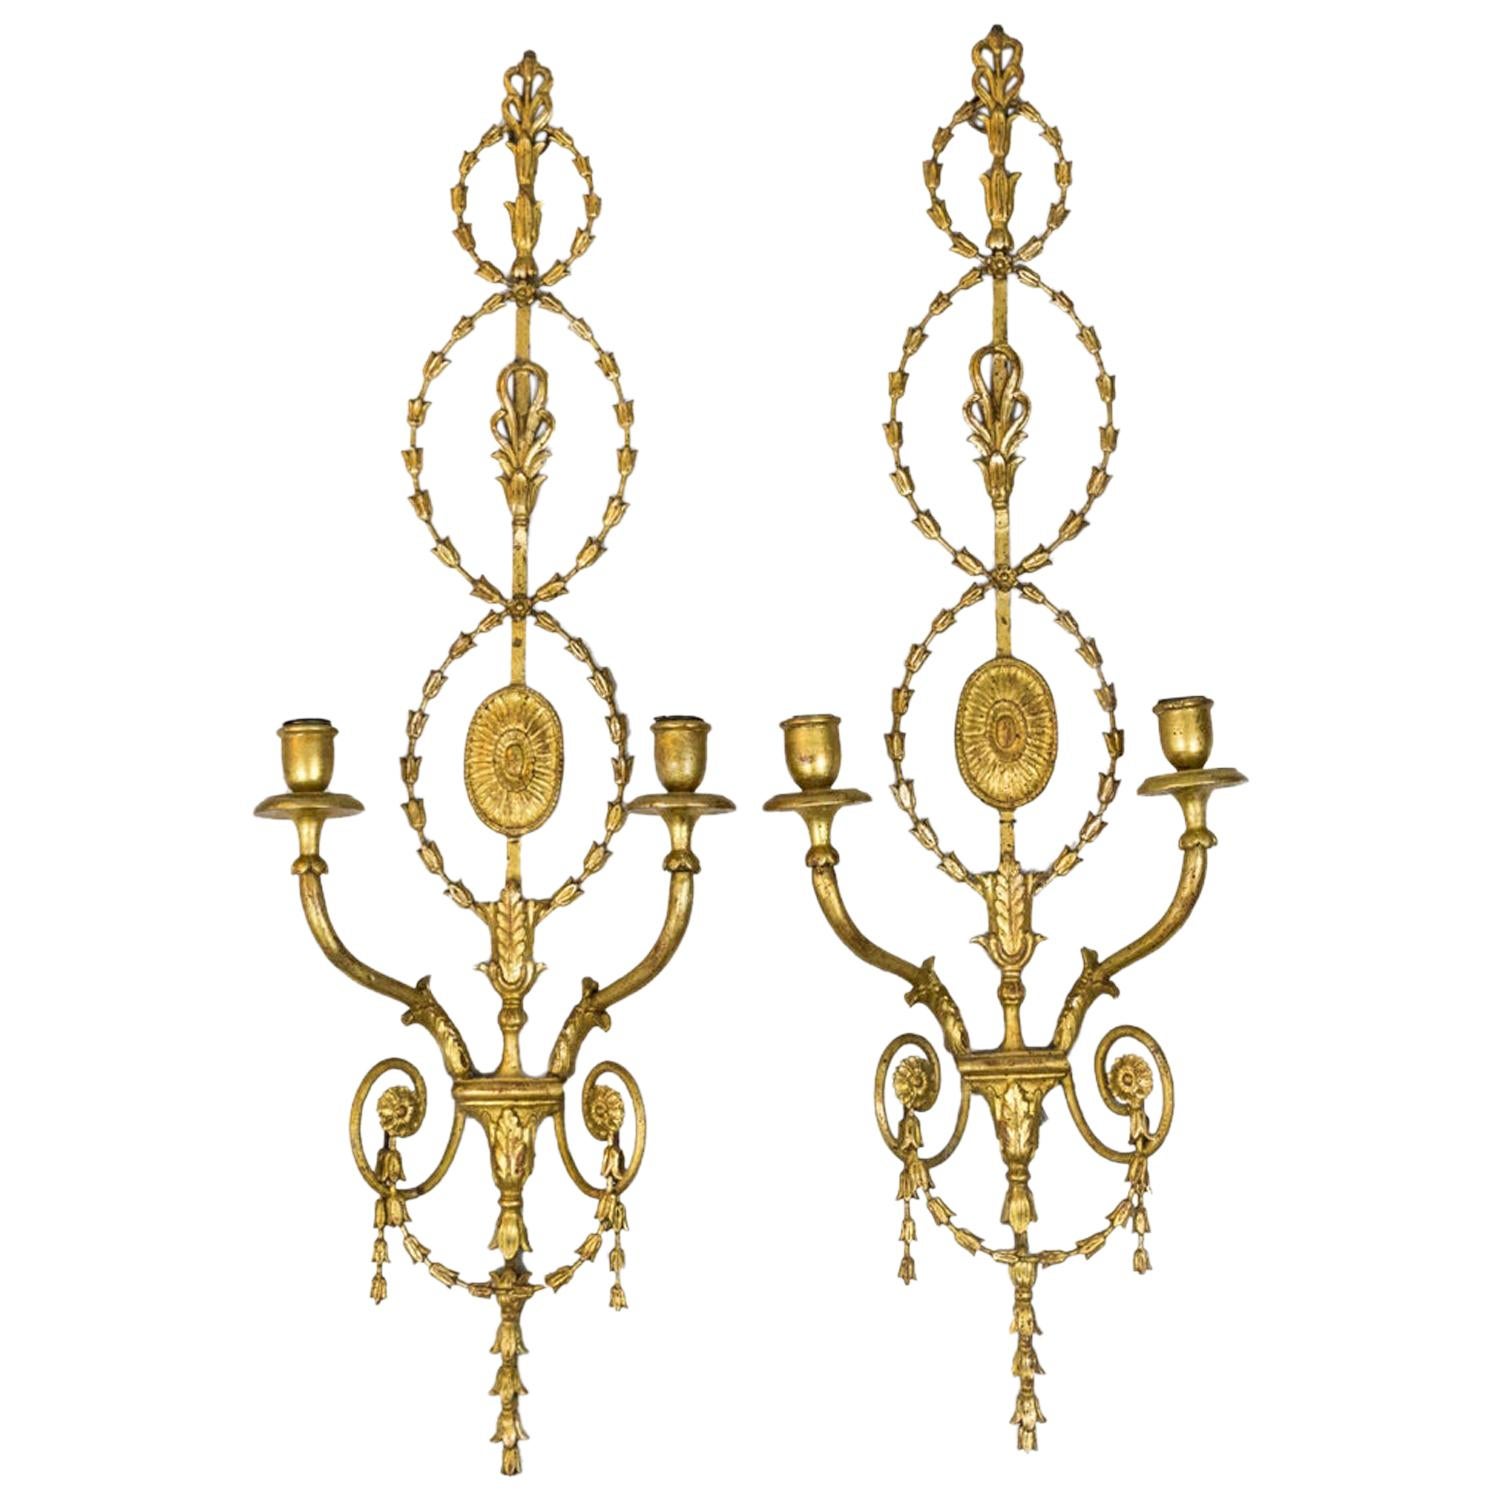 Pair of Adam Style Wall Sconces in Gilt Stucco and Metal, 1950s For Sale